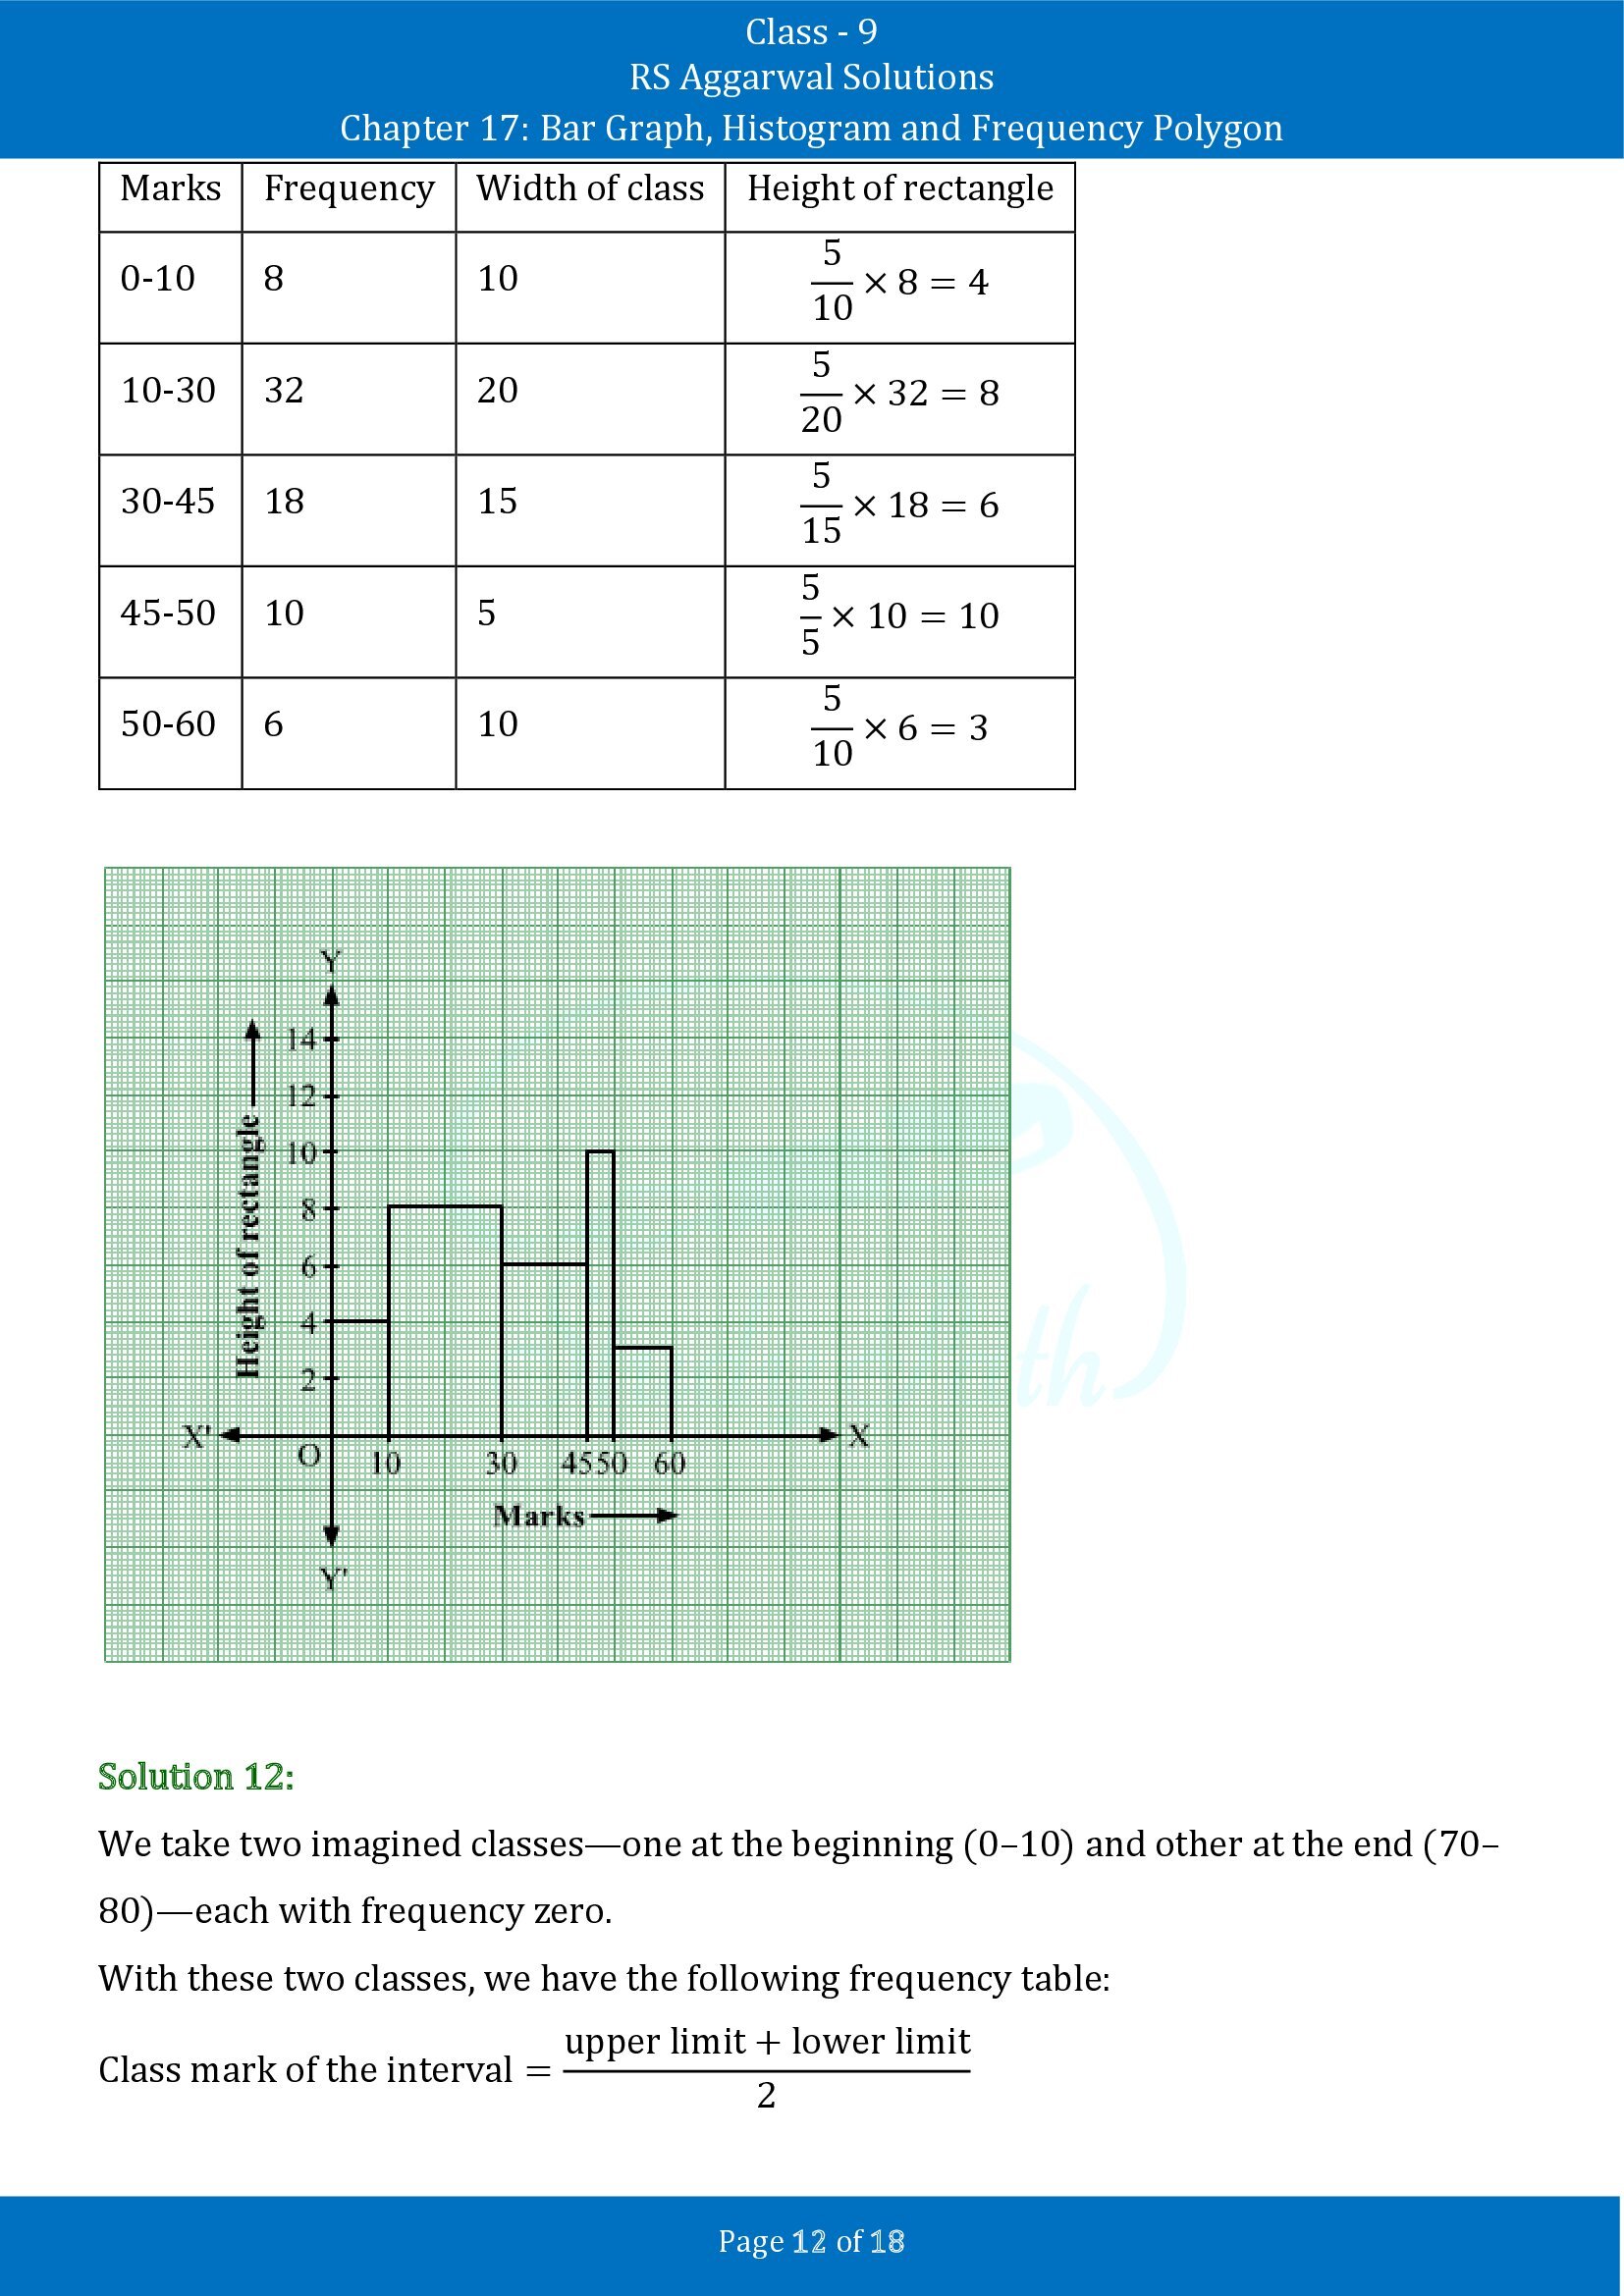 RS Aggarwal Solutions Class 9 Chapter 17 Bar Graph Histogram and Frequency Polygon Exercise 17B 00012